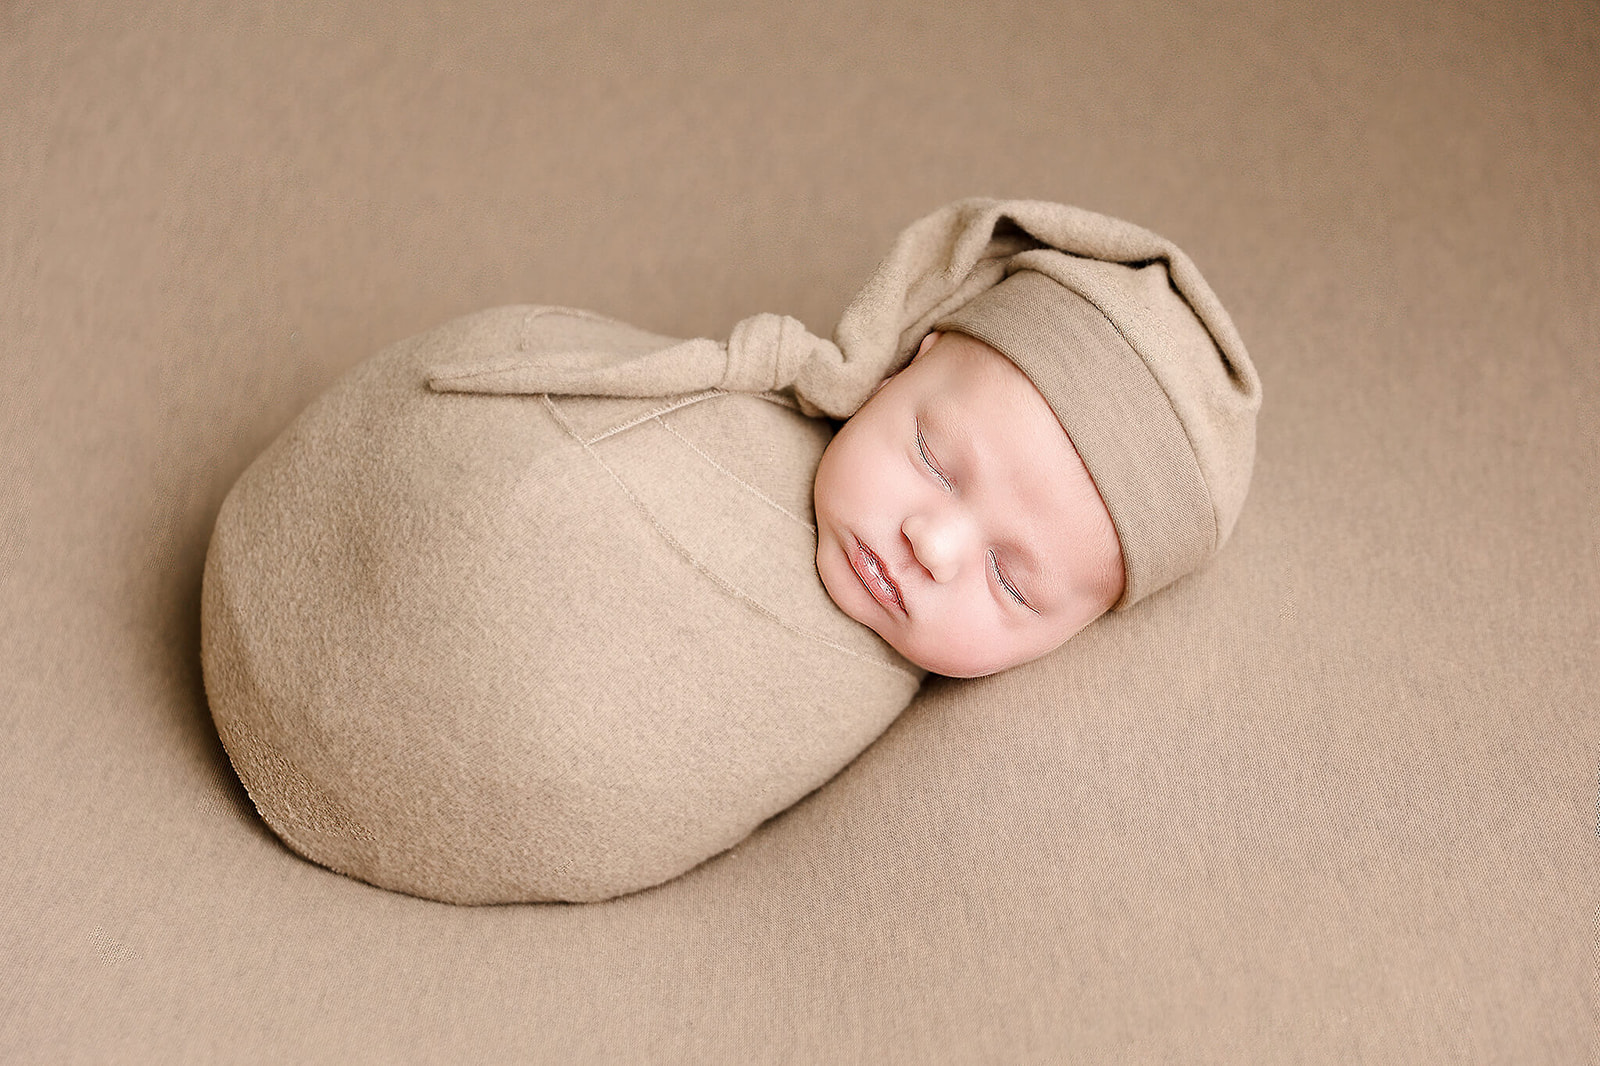 A newborn baby in a brown sleeper cap and swaddle sleeps on a matching bed